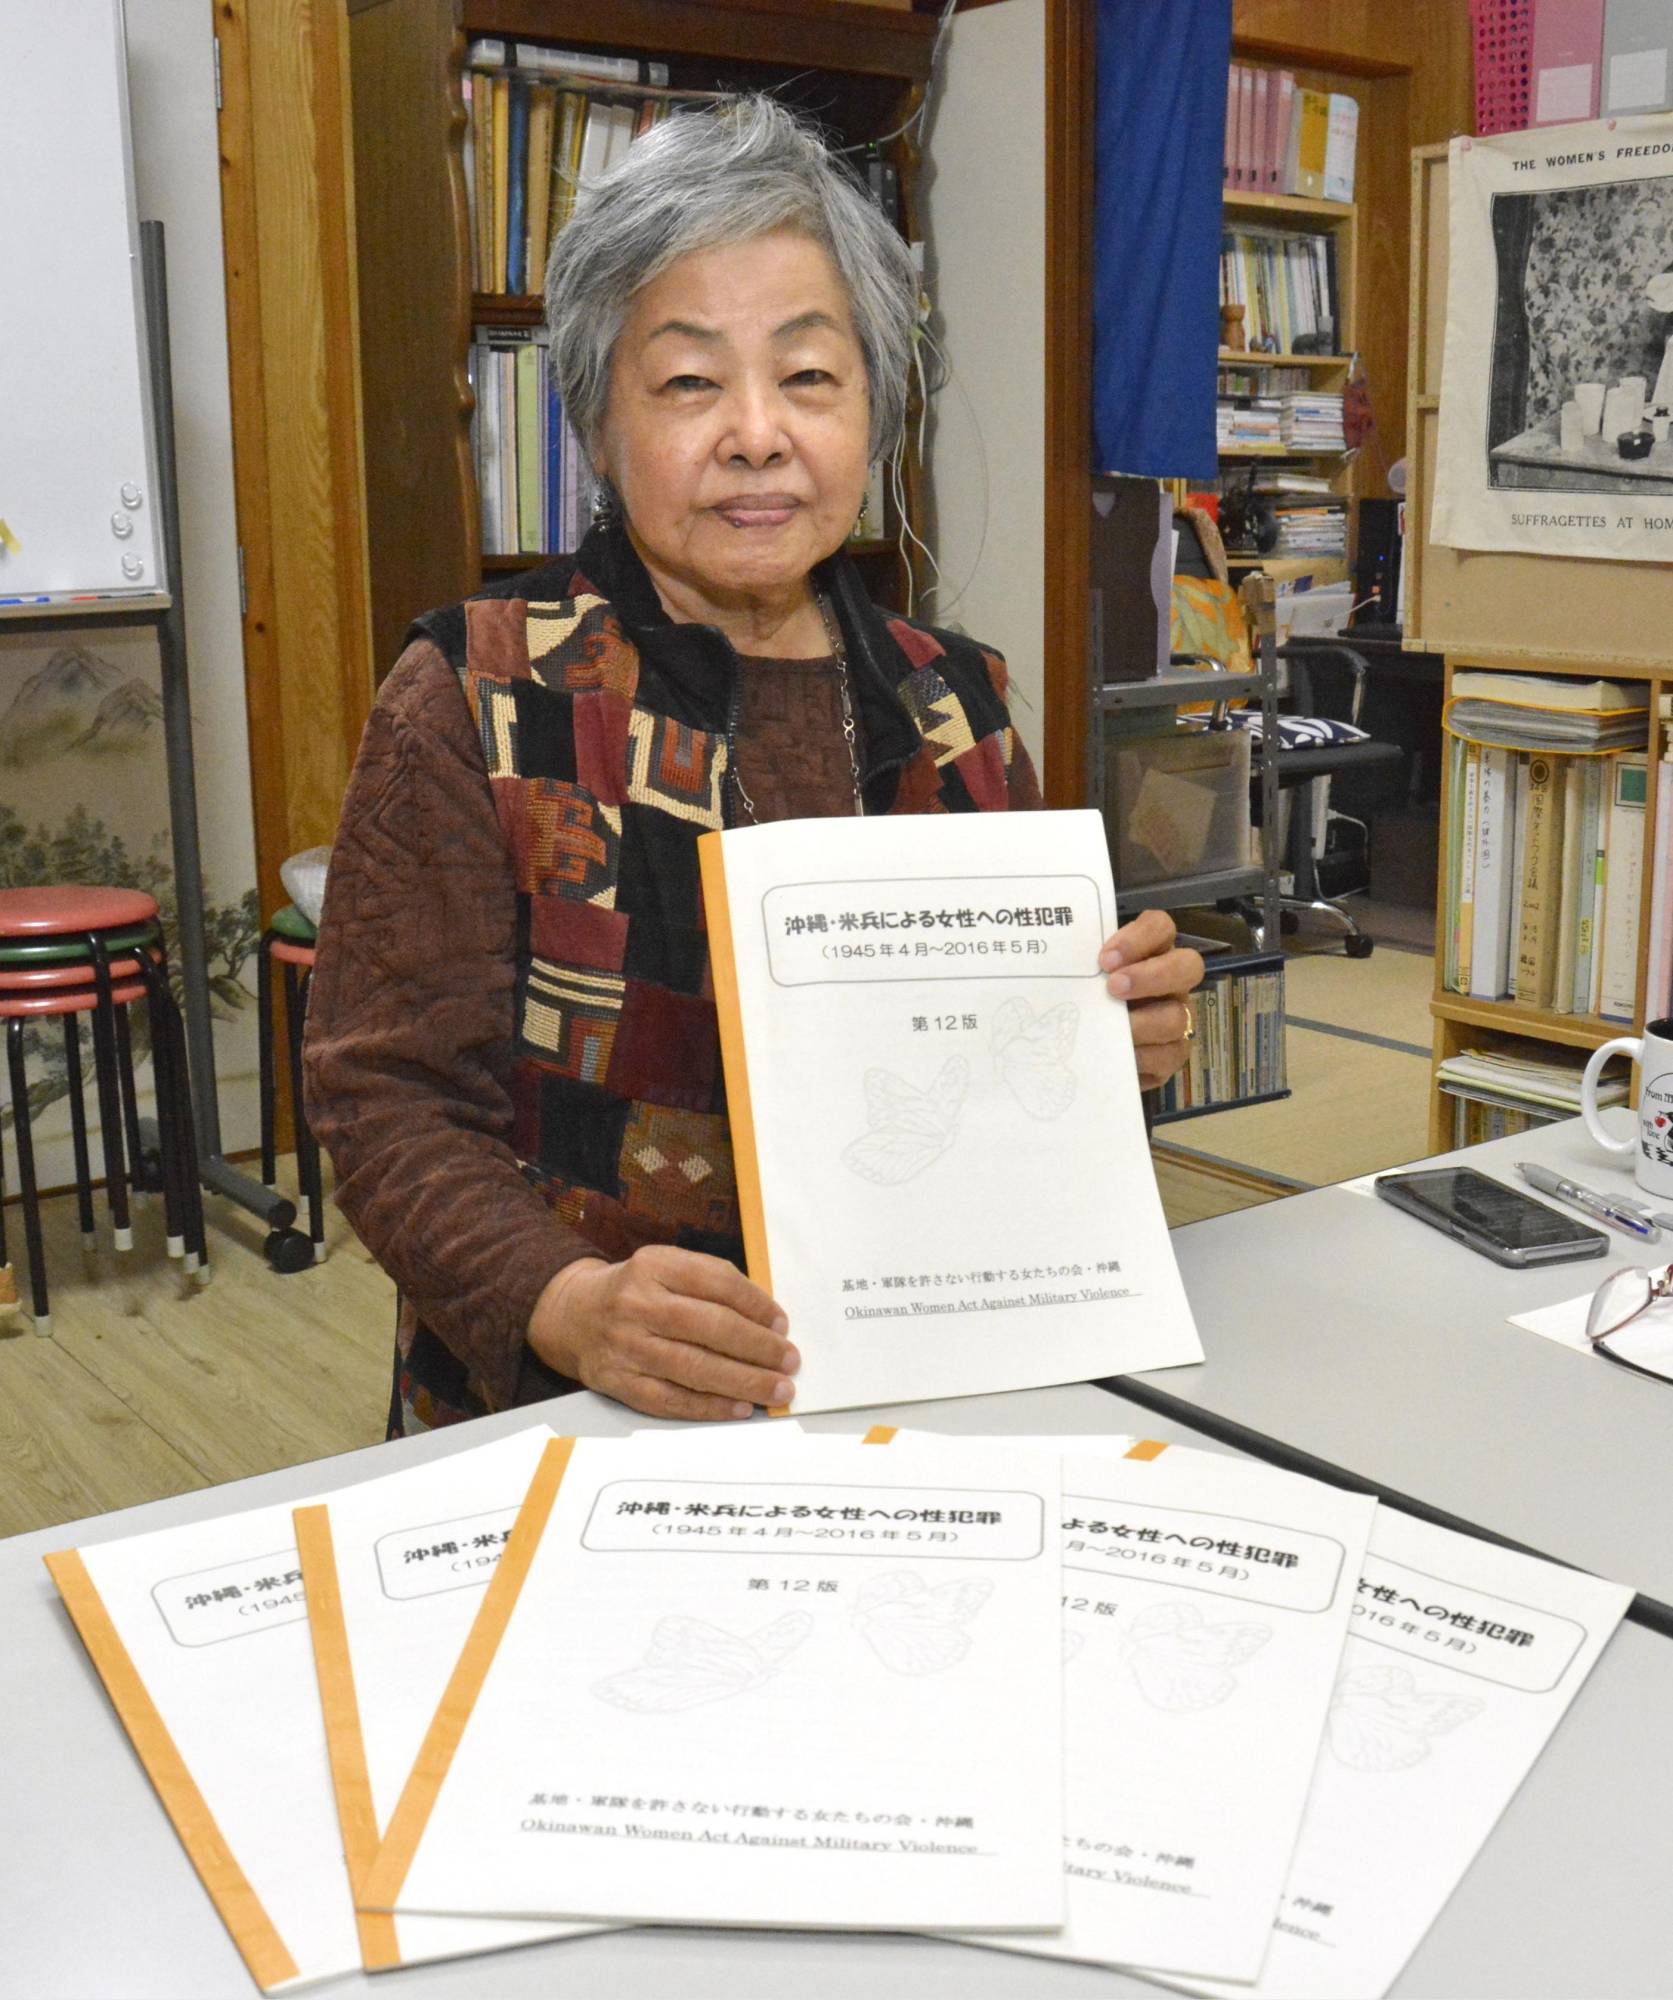 Okinawan womens civic group chronicles sex crimes by photo